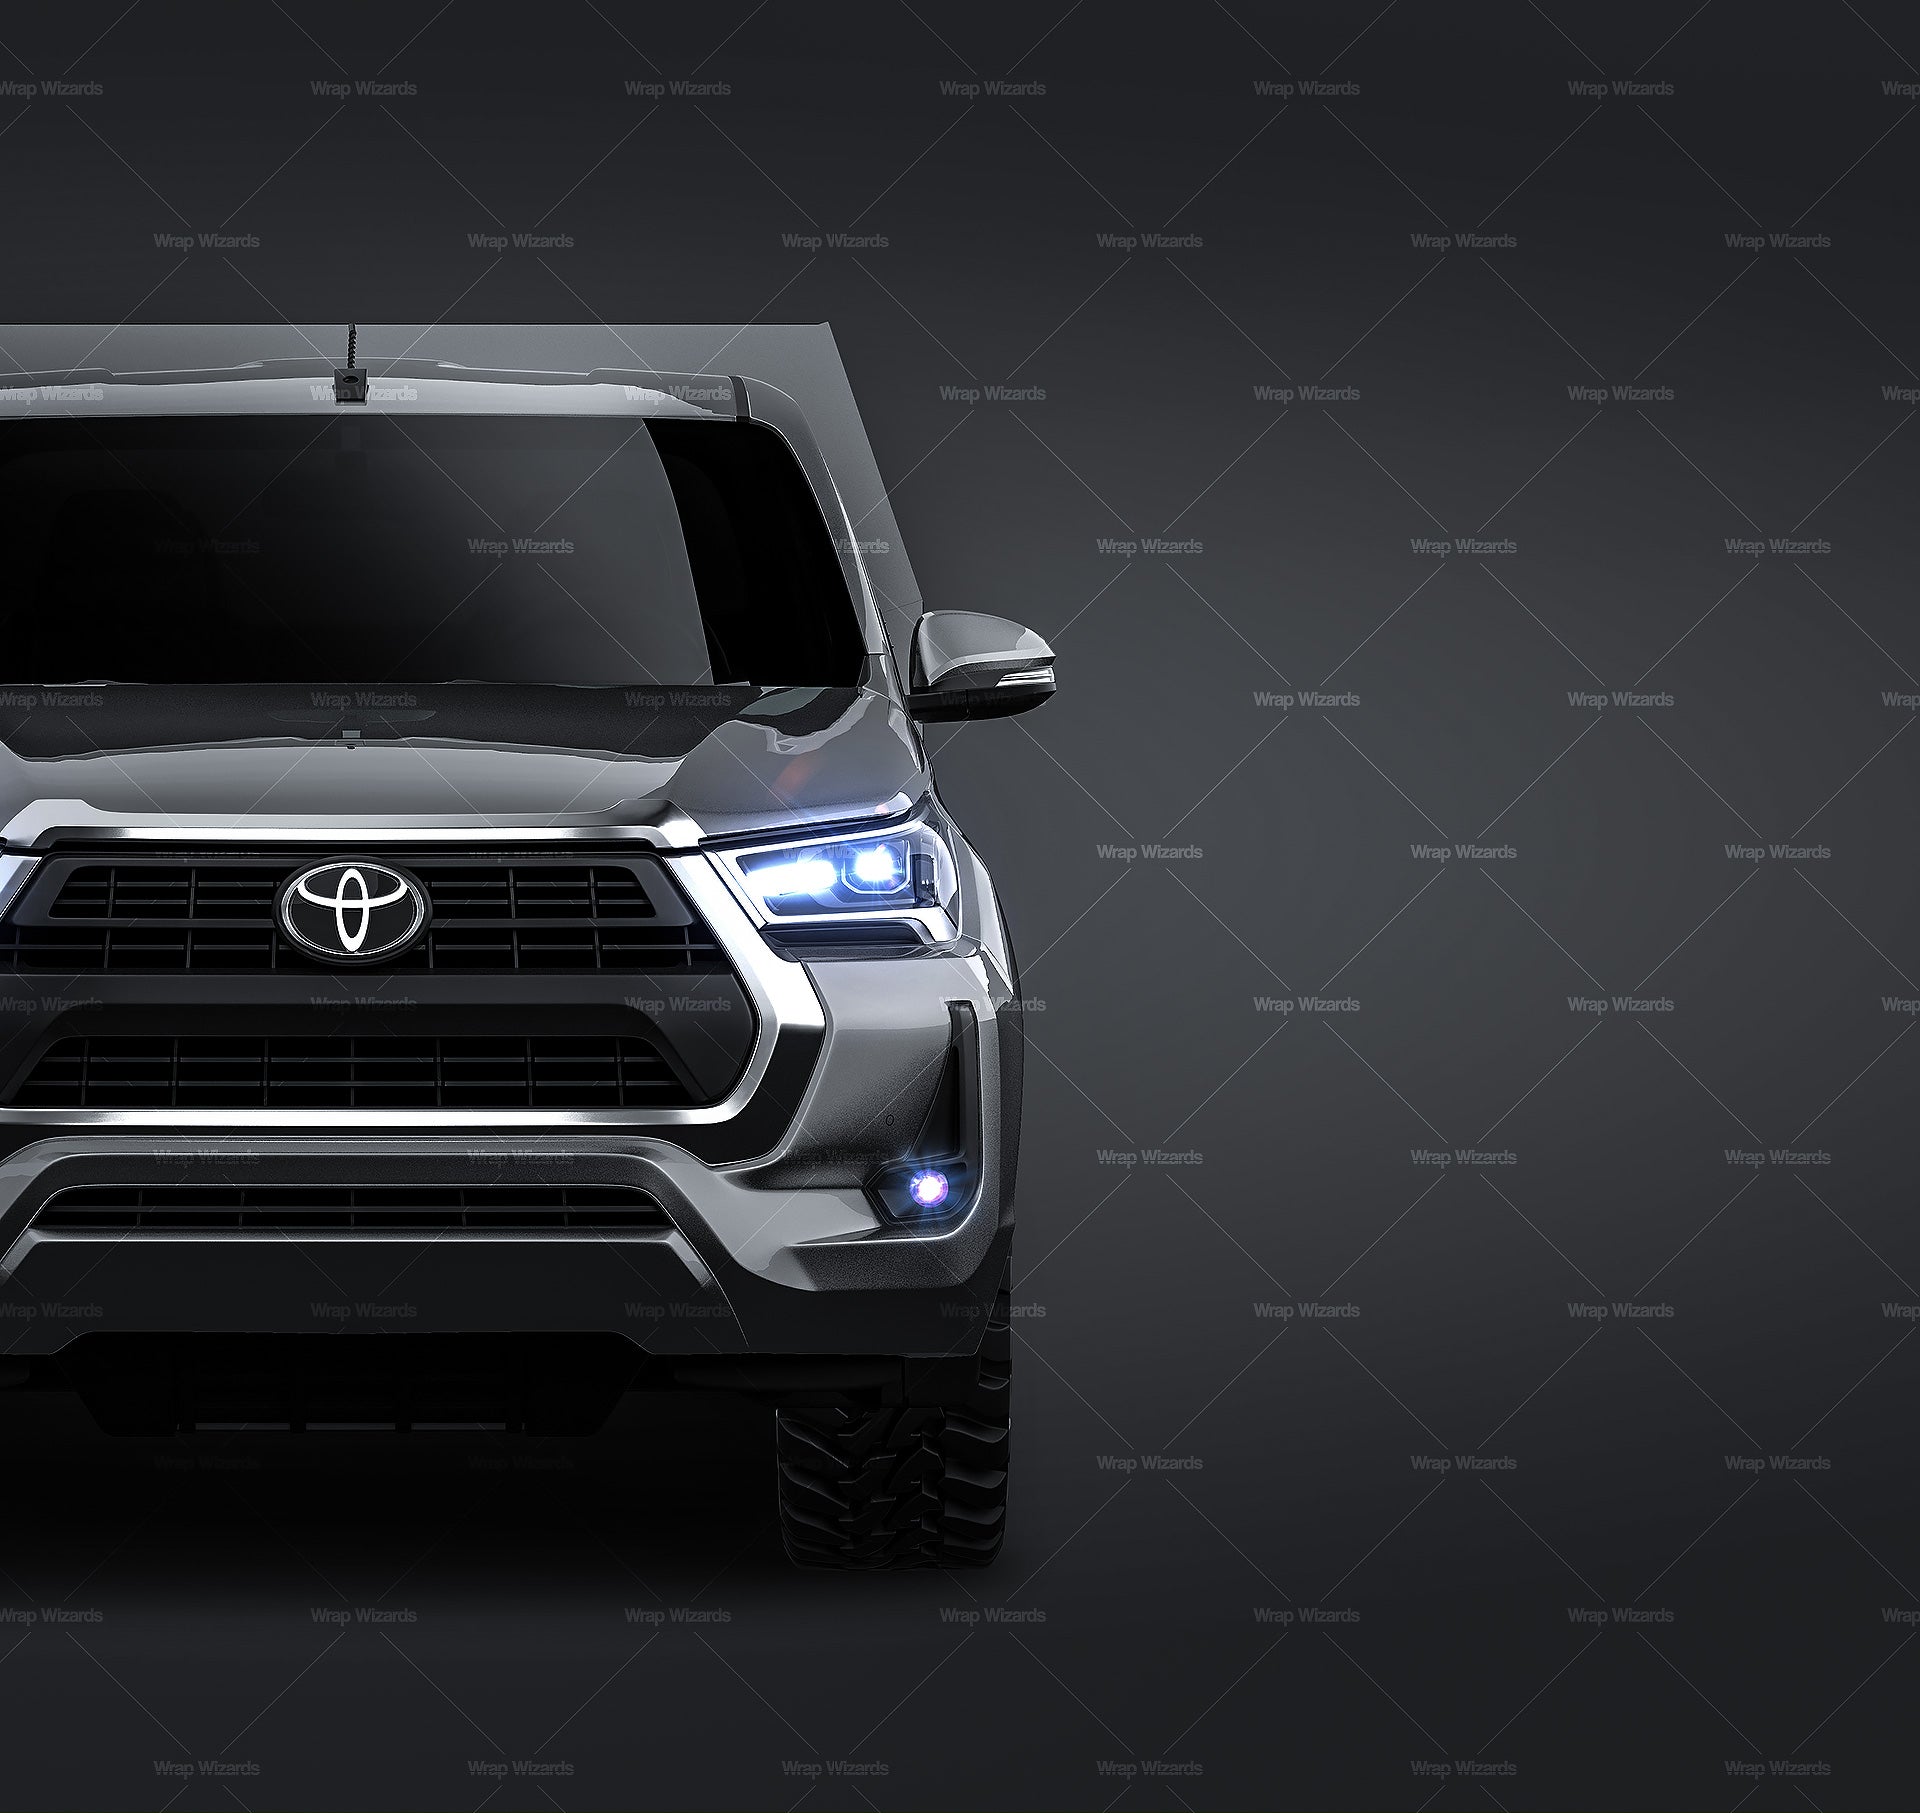 Toyota Hilux 2021 Double Cab Alloy Tray with UTE toolbox glossy finish - all sides Car Mockup Template.psd